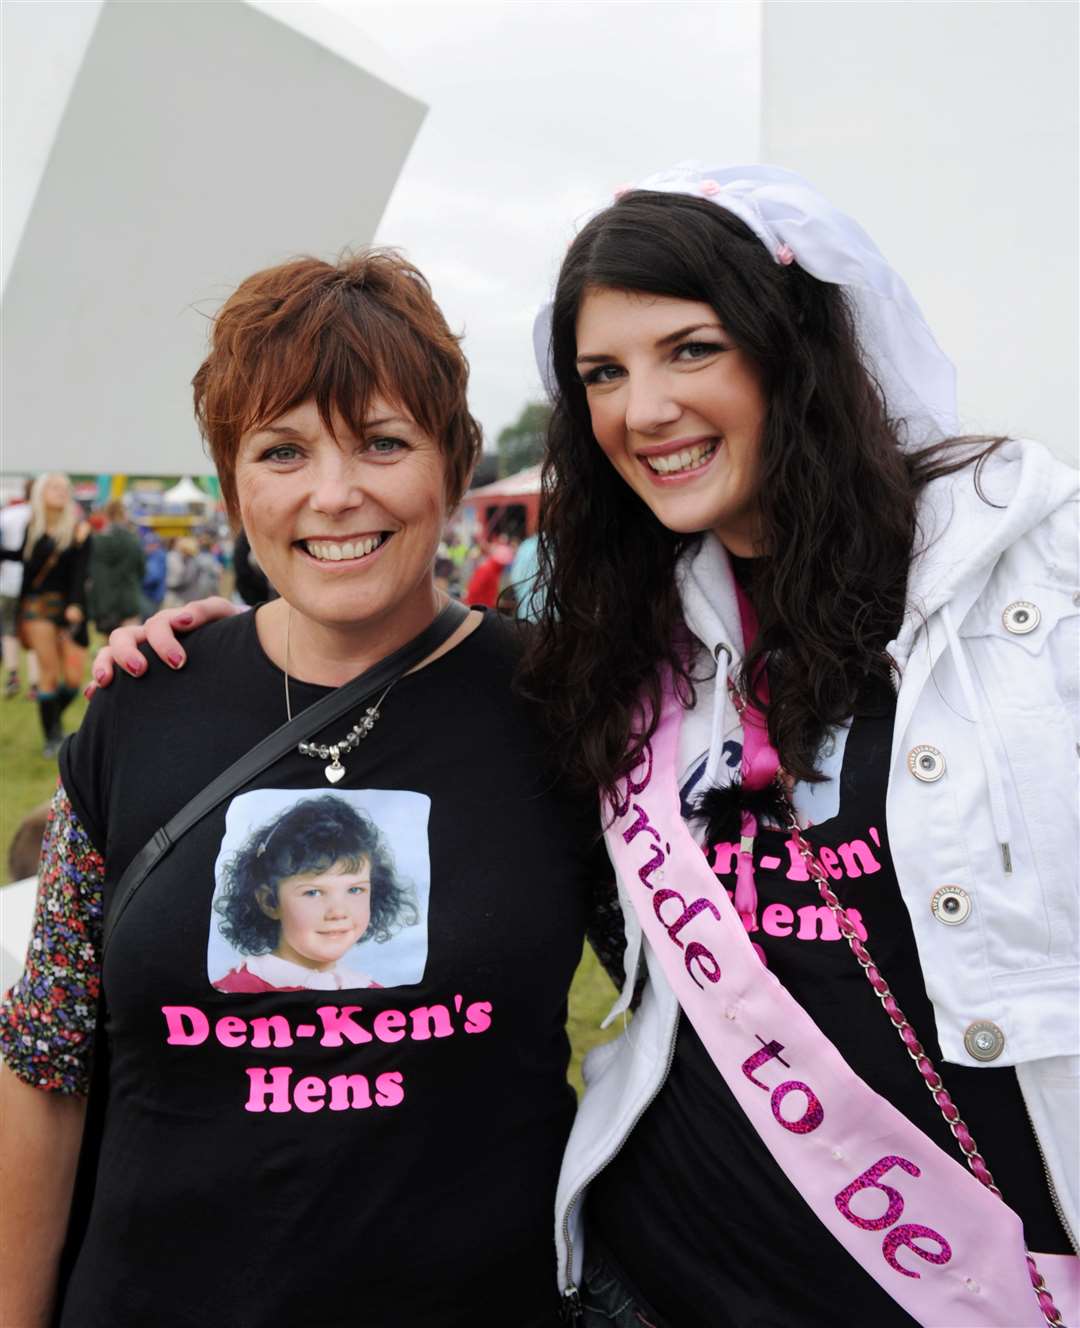 Denise Kennedy at Rockness for her hen party with mum Heather and friends. Picture: Alison White